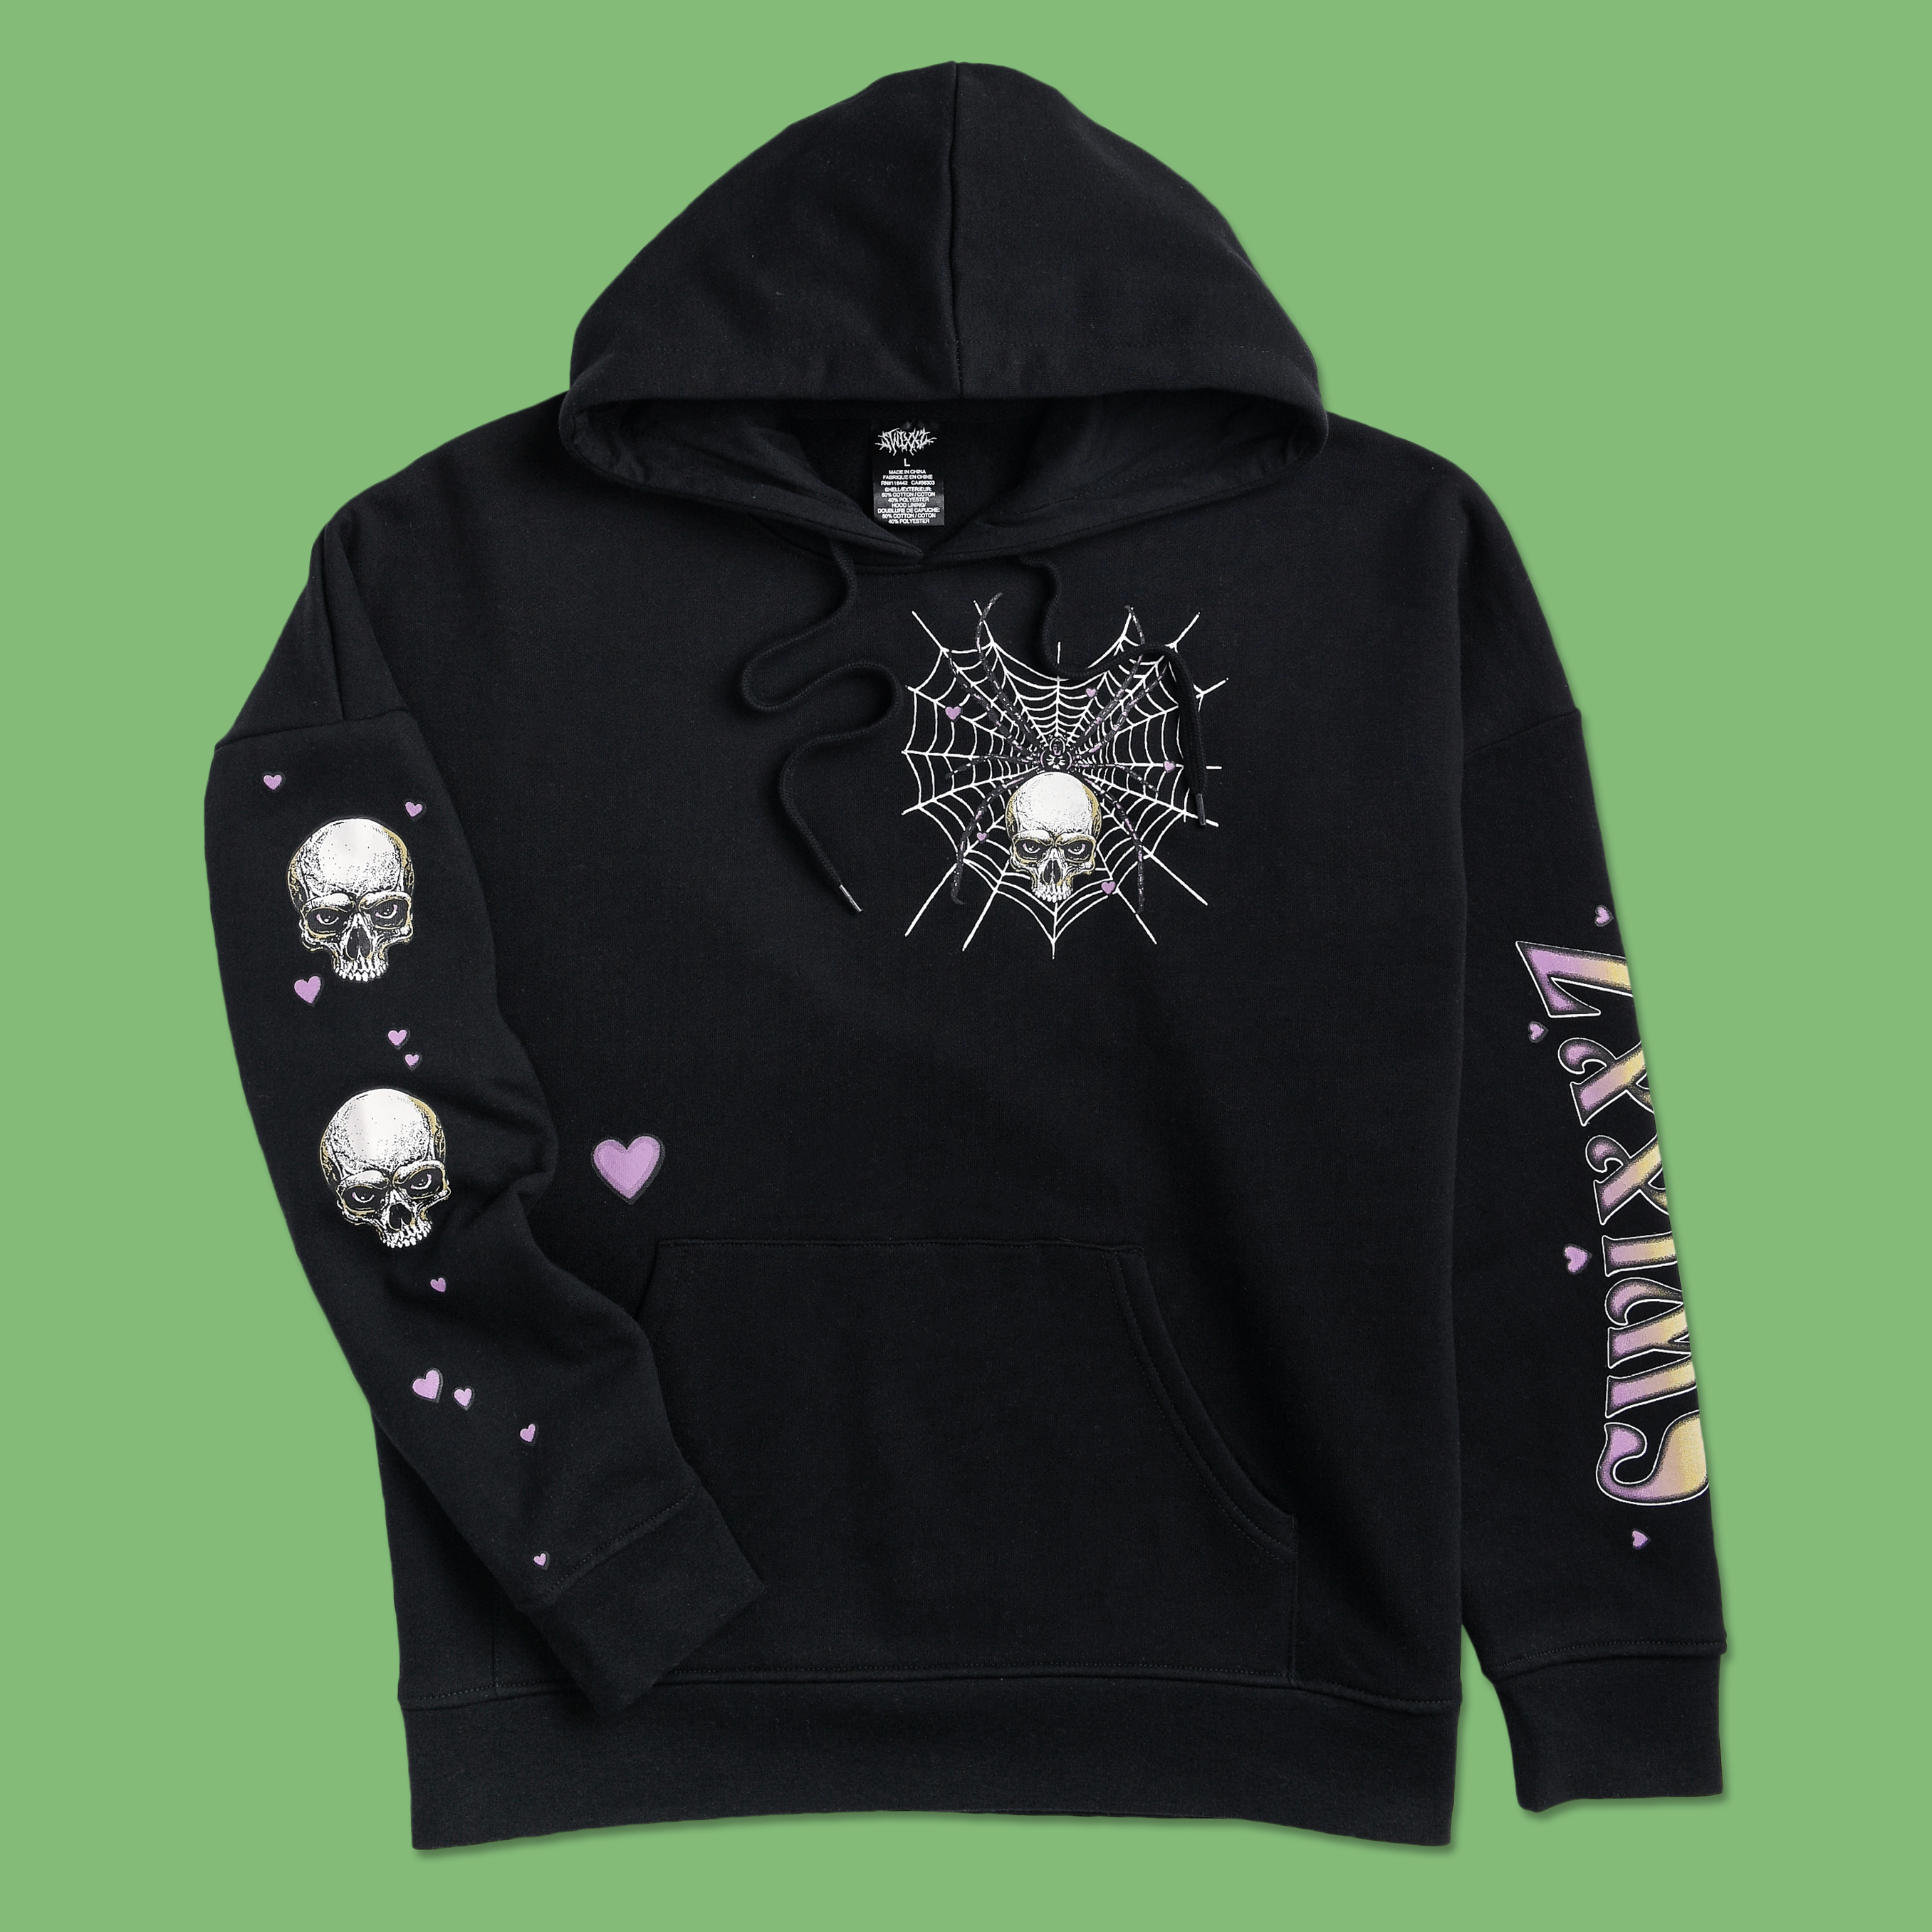 Tangled Skull Black Hoodie from SWIXXZ by Maggie Lindemann - Front